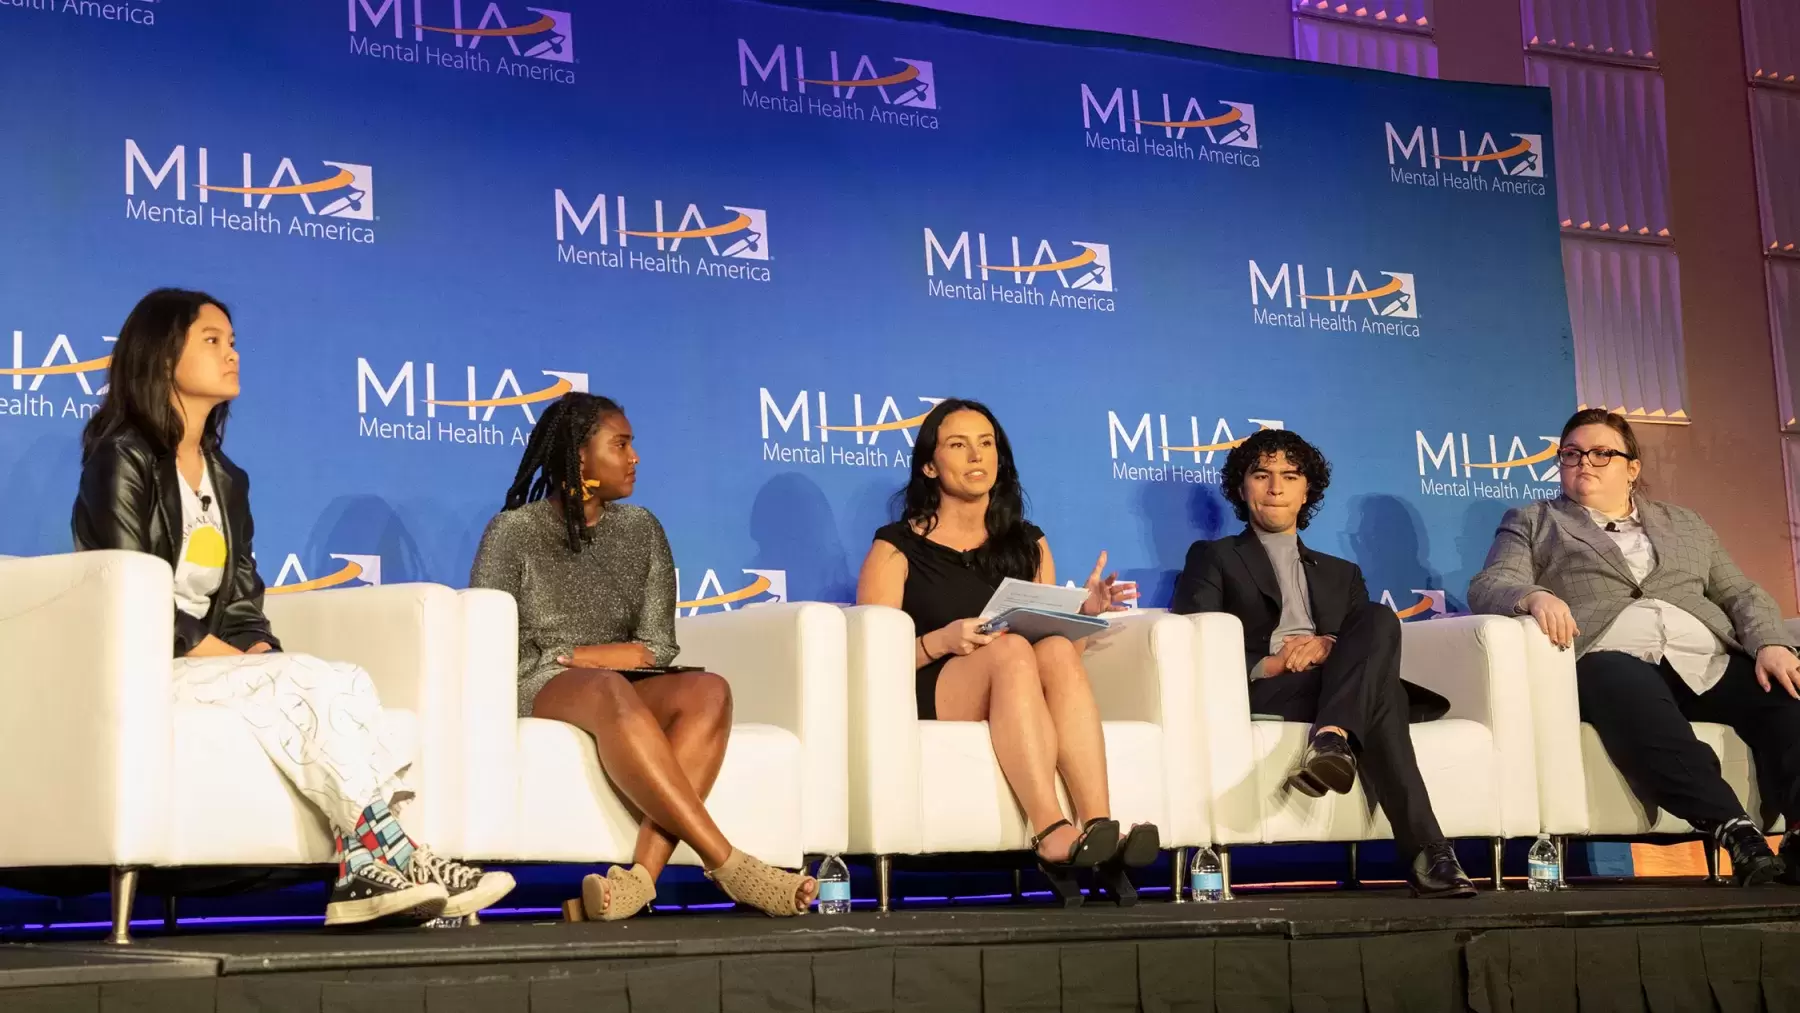 3 insights from the 2023 MHA Conference that gave me hope Mental